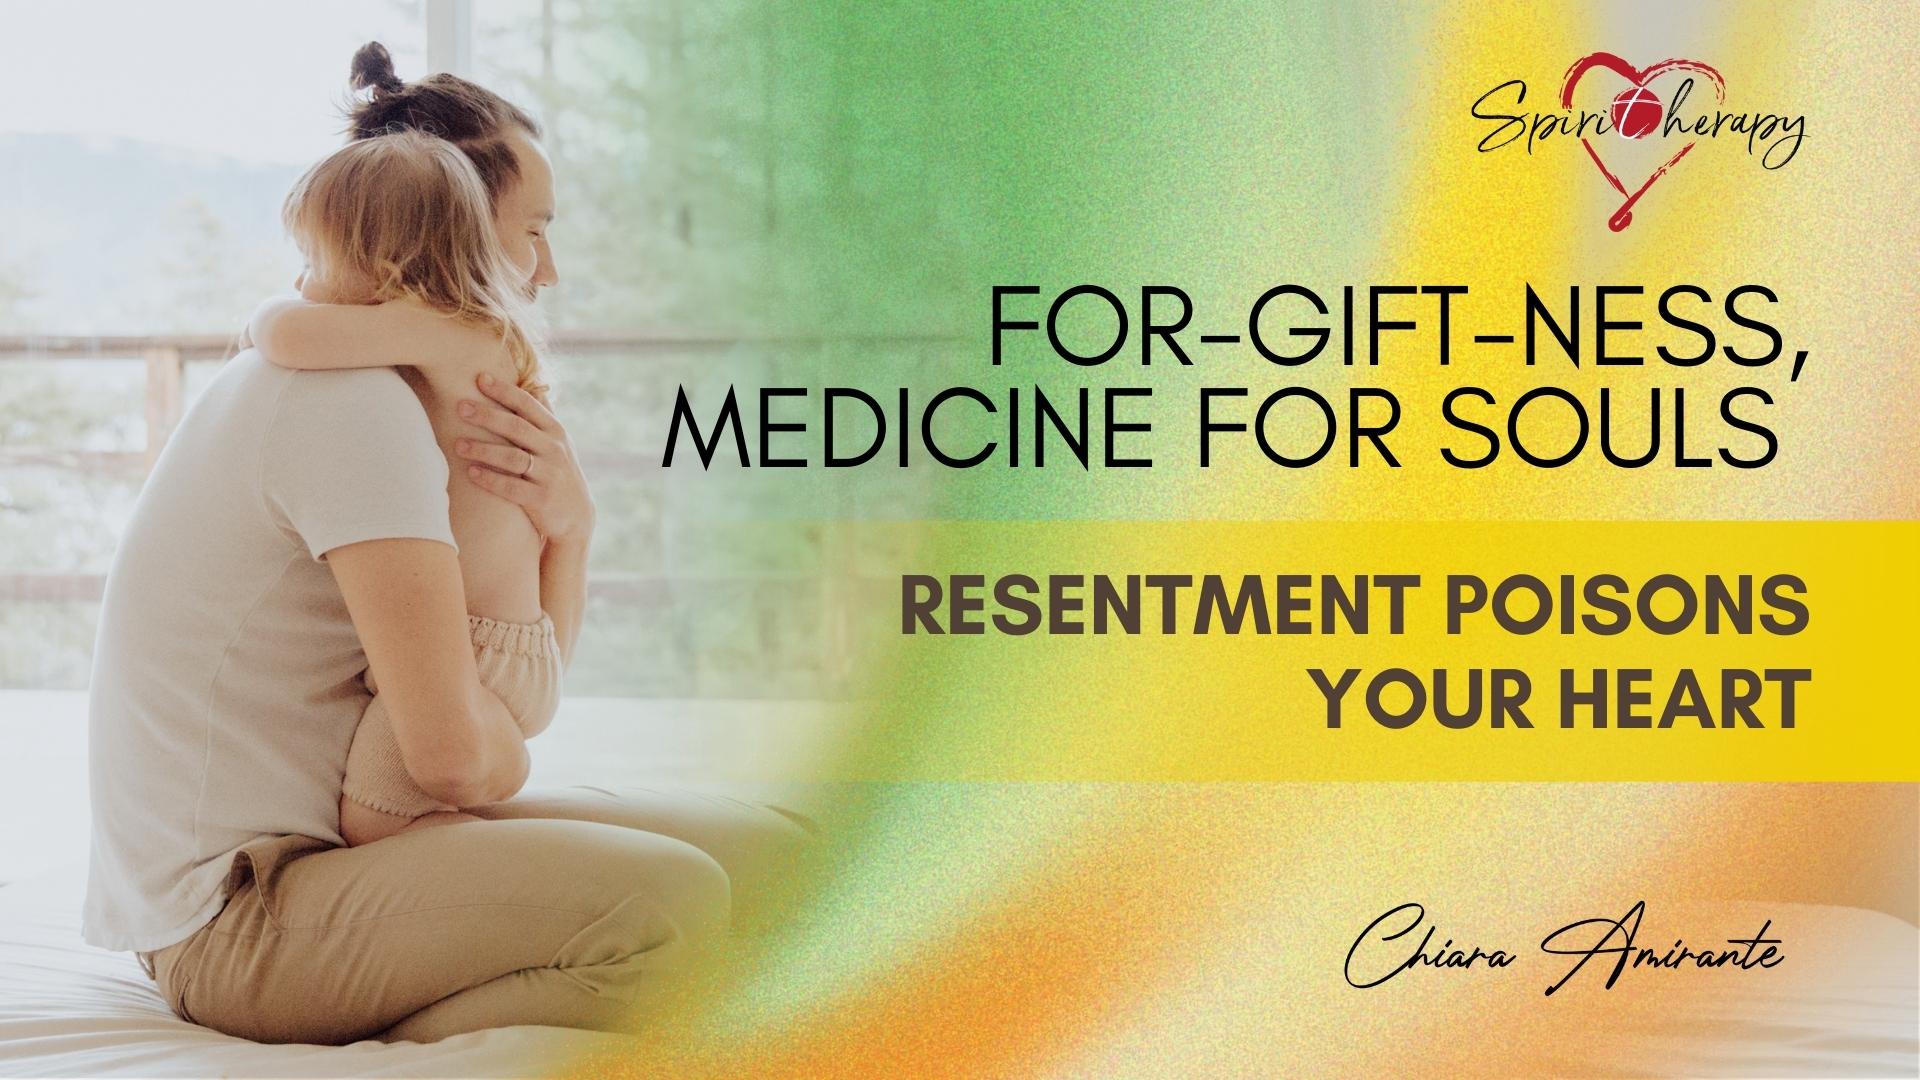 FOR-GIFT-NESS, MEDICINE FOR SOULS - Resentment poisons your heart - Chiara Amirante